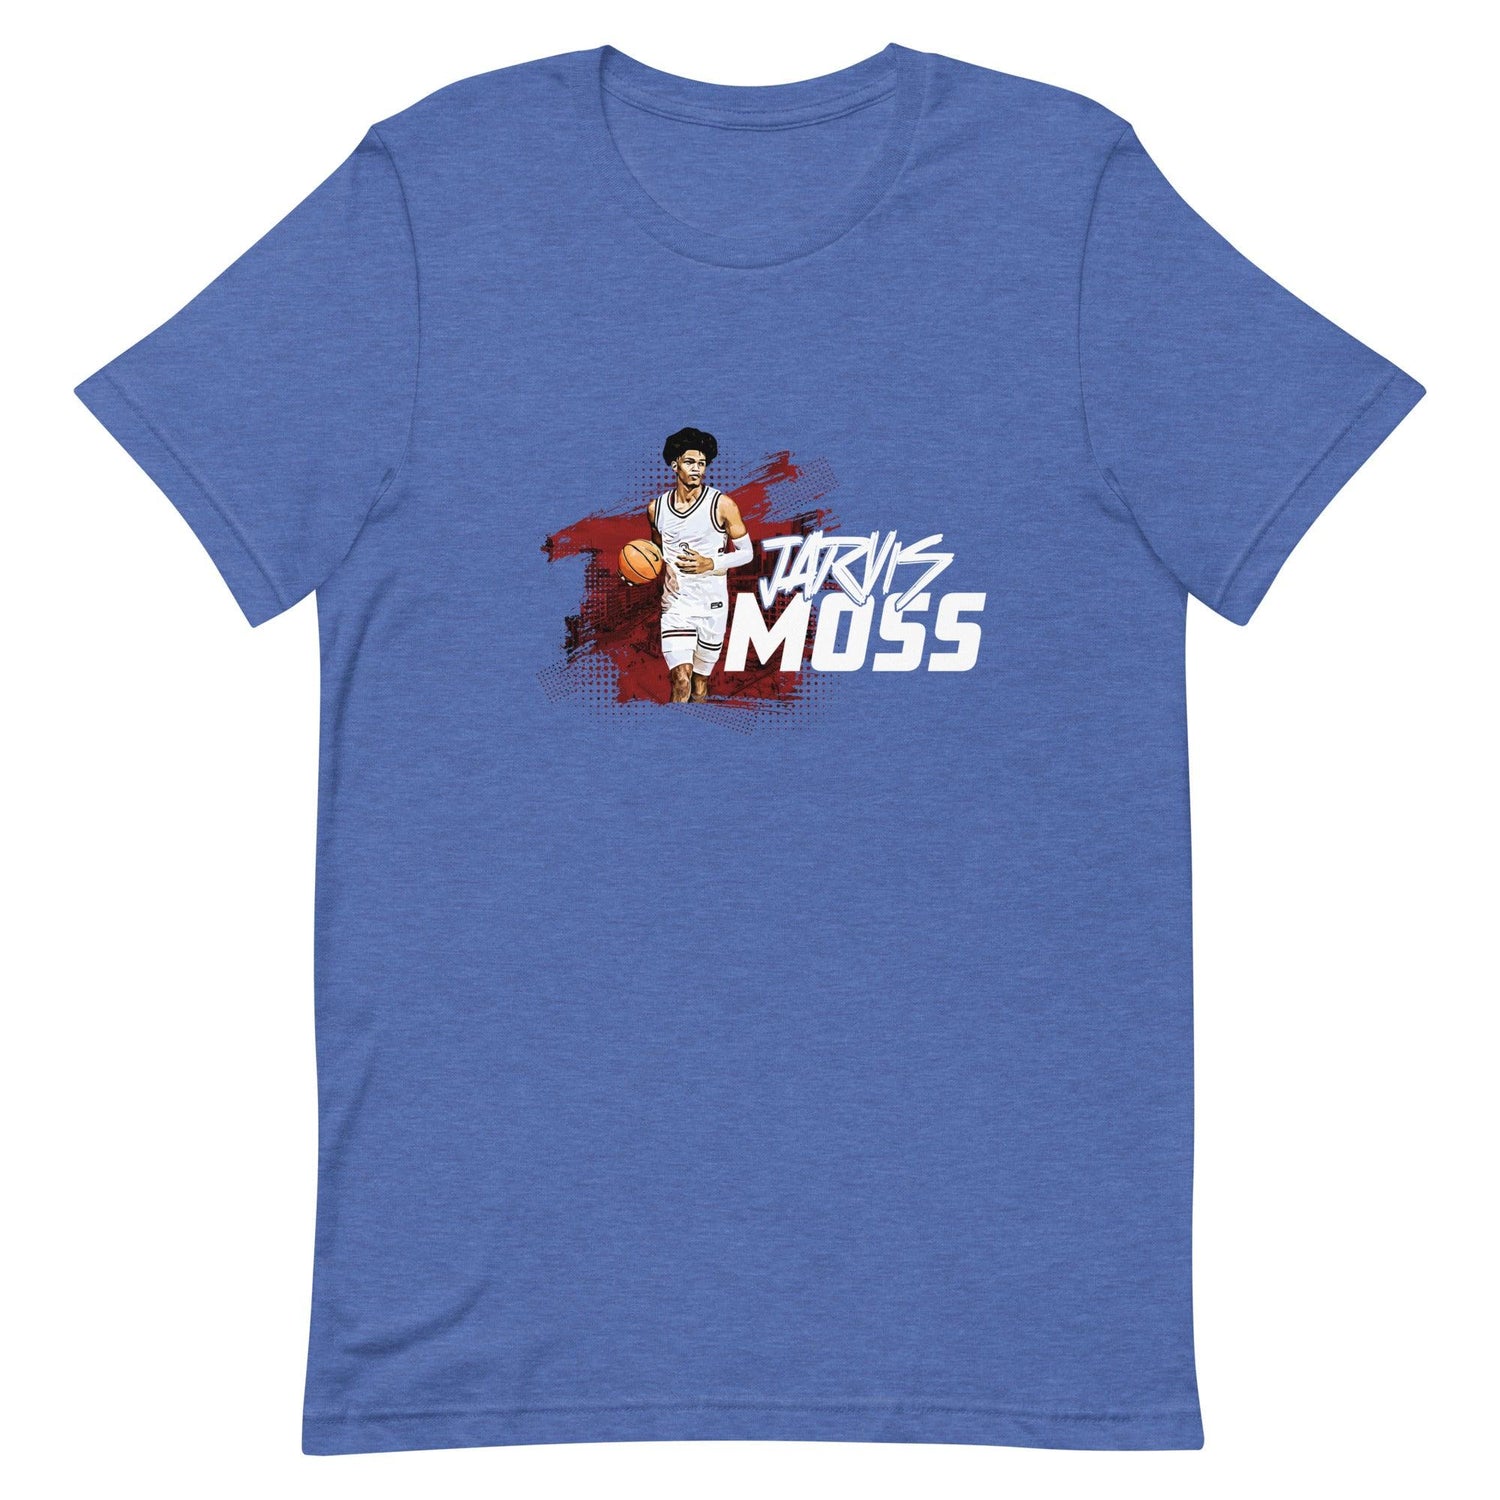 Jarvis Moss "Gameday" t-shirt - Fan Arch